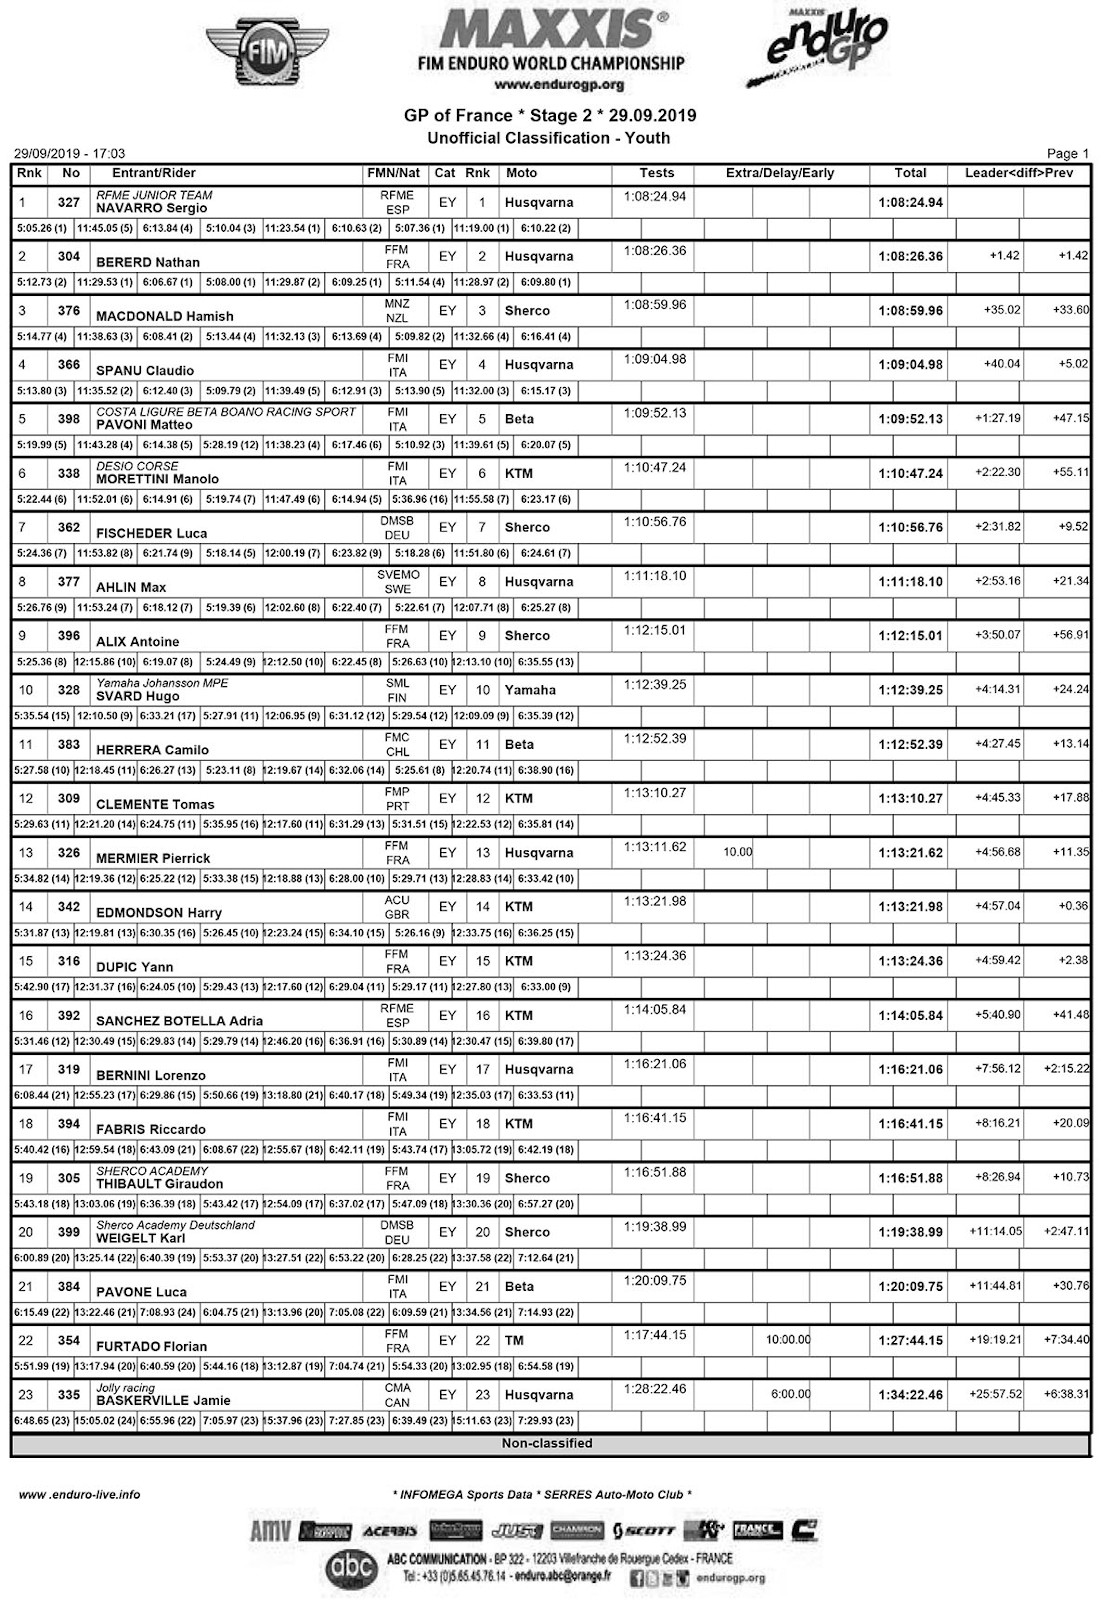 french_endurogp_2019_results_youth-1